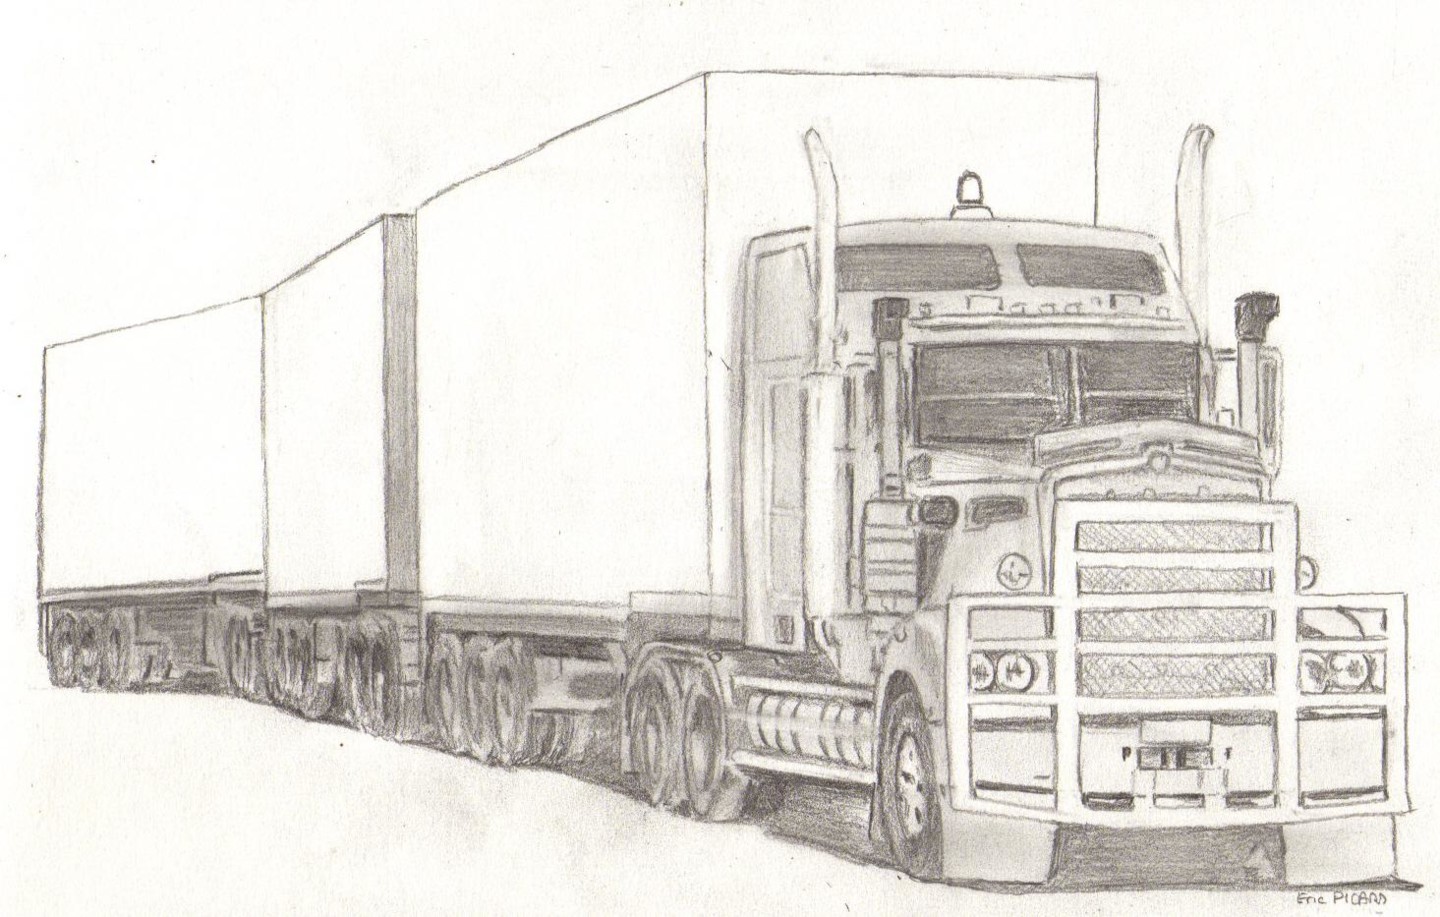 Camion 0906 0032 Fnd Modele 01 Dessin 01 Jpg Painting By Eric Picard Artmajeur